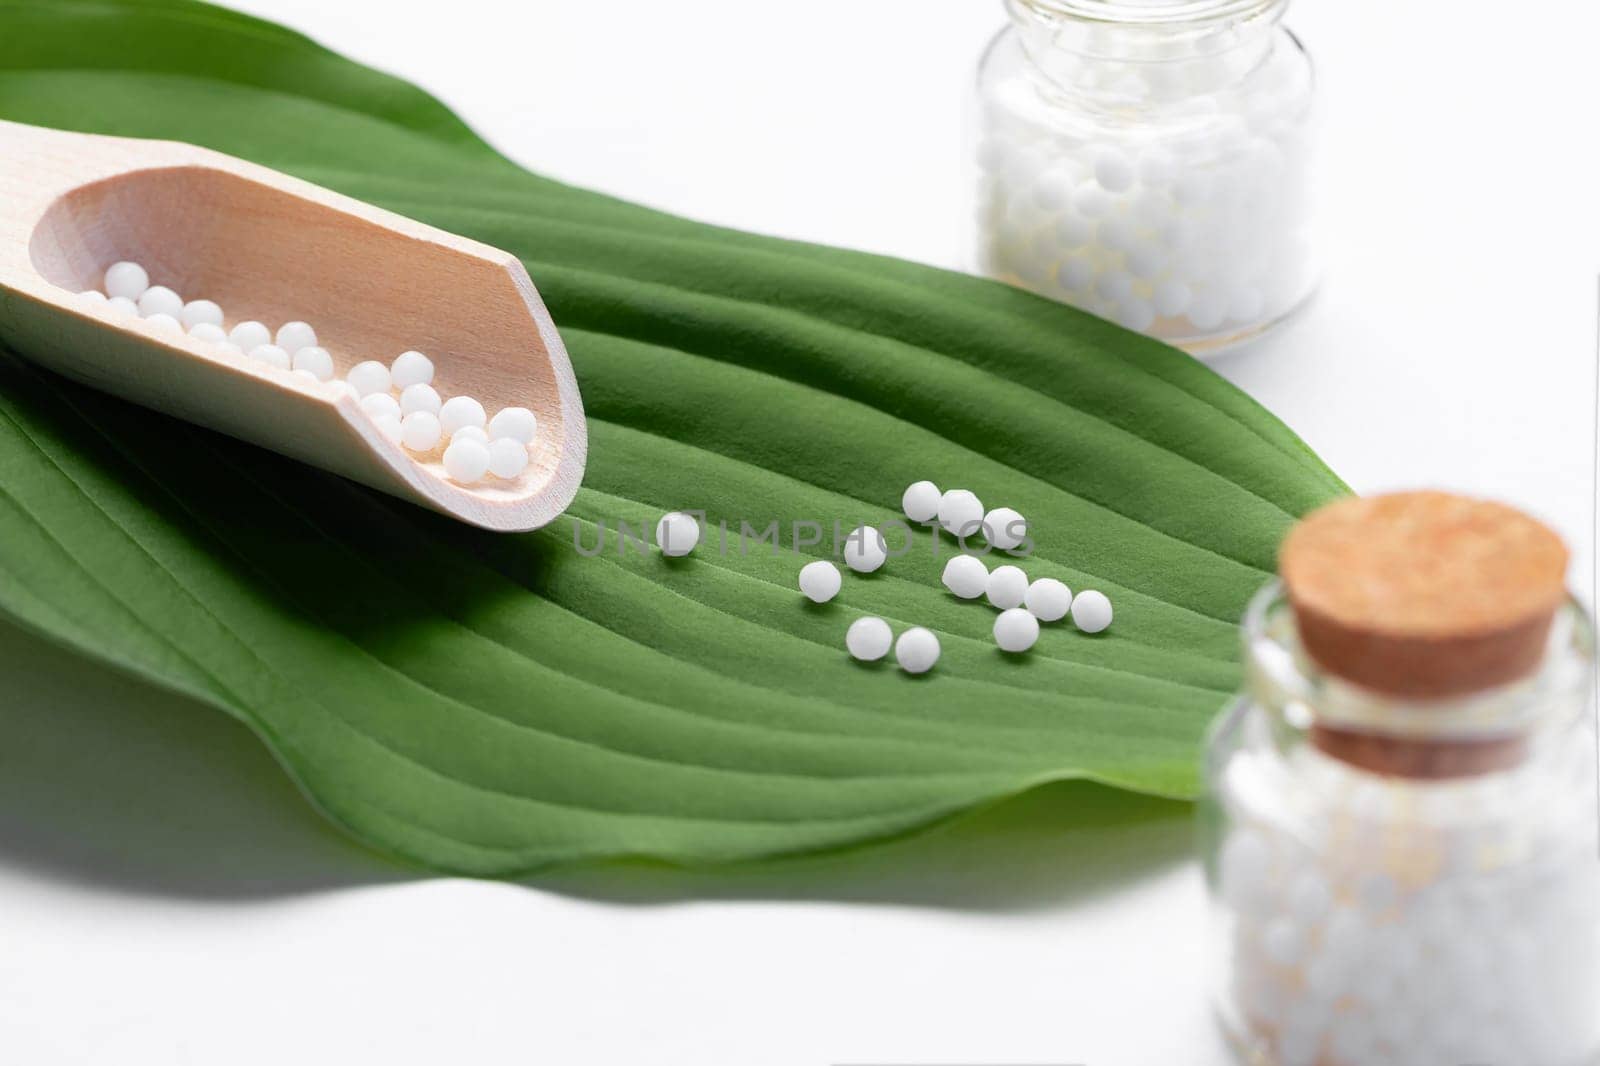 Homeopathic pills scattered from a wooden scoop on a green leaf by galsand